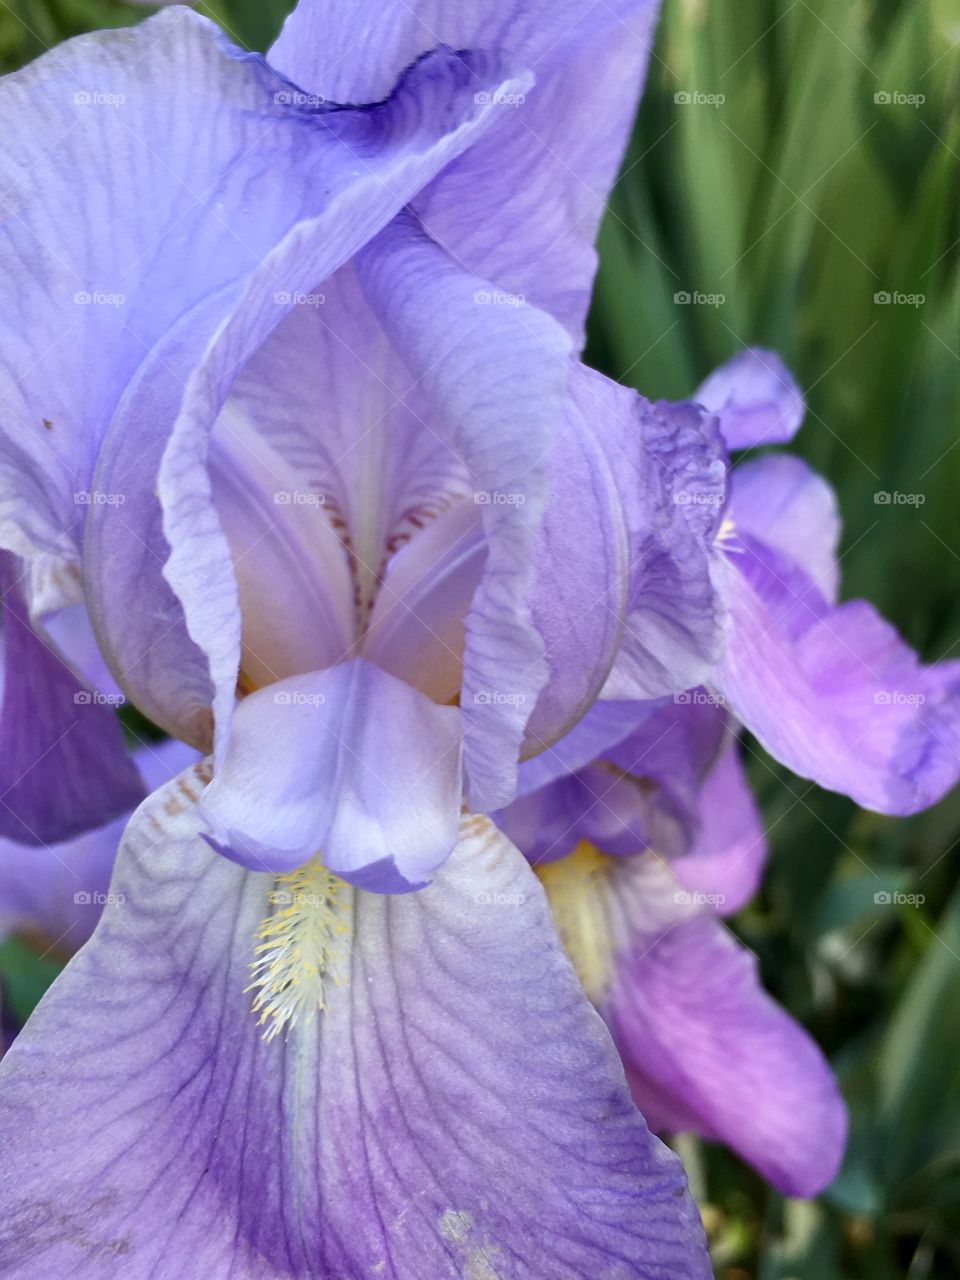 Lilac iris brightens a cloudy day- but a yard full glows to capture your heart! 